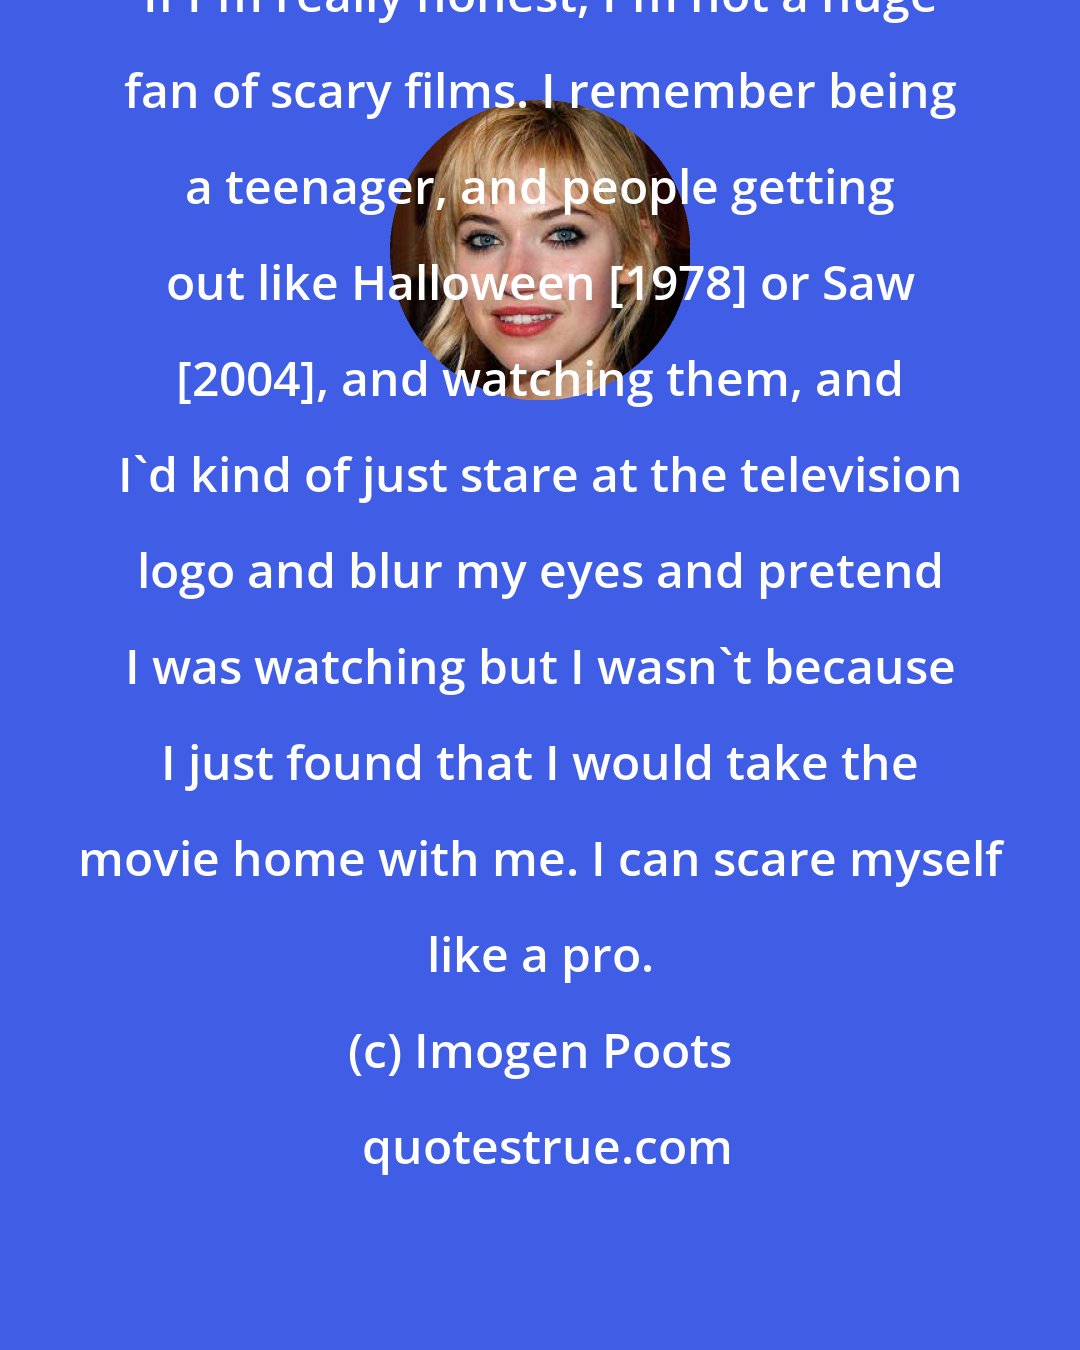 Imogen Poots: If I'm really honest, I'm not a huge fan of scary films. I remember being a teenager, and people getting out like Halloween [1978] or Saw [2004], and watching them, and I'd kind of just stare at the television logo and blur my eyes and pretend I was watching but I wasn't because I just found that I would take the movie home with me. I can scare myself like a pro.